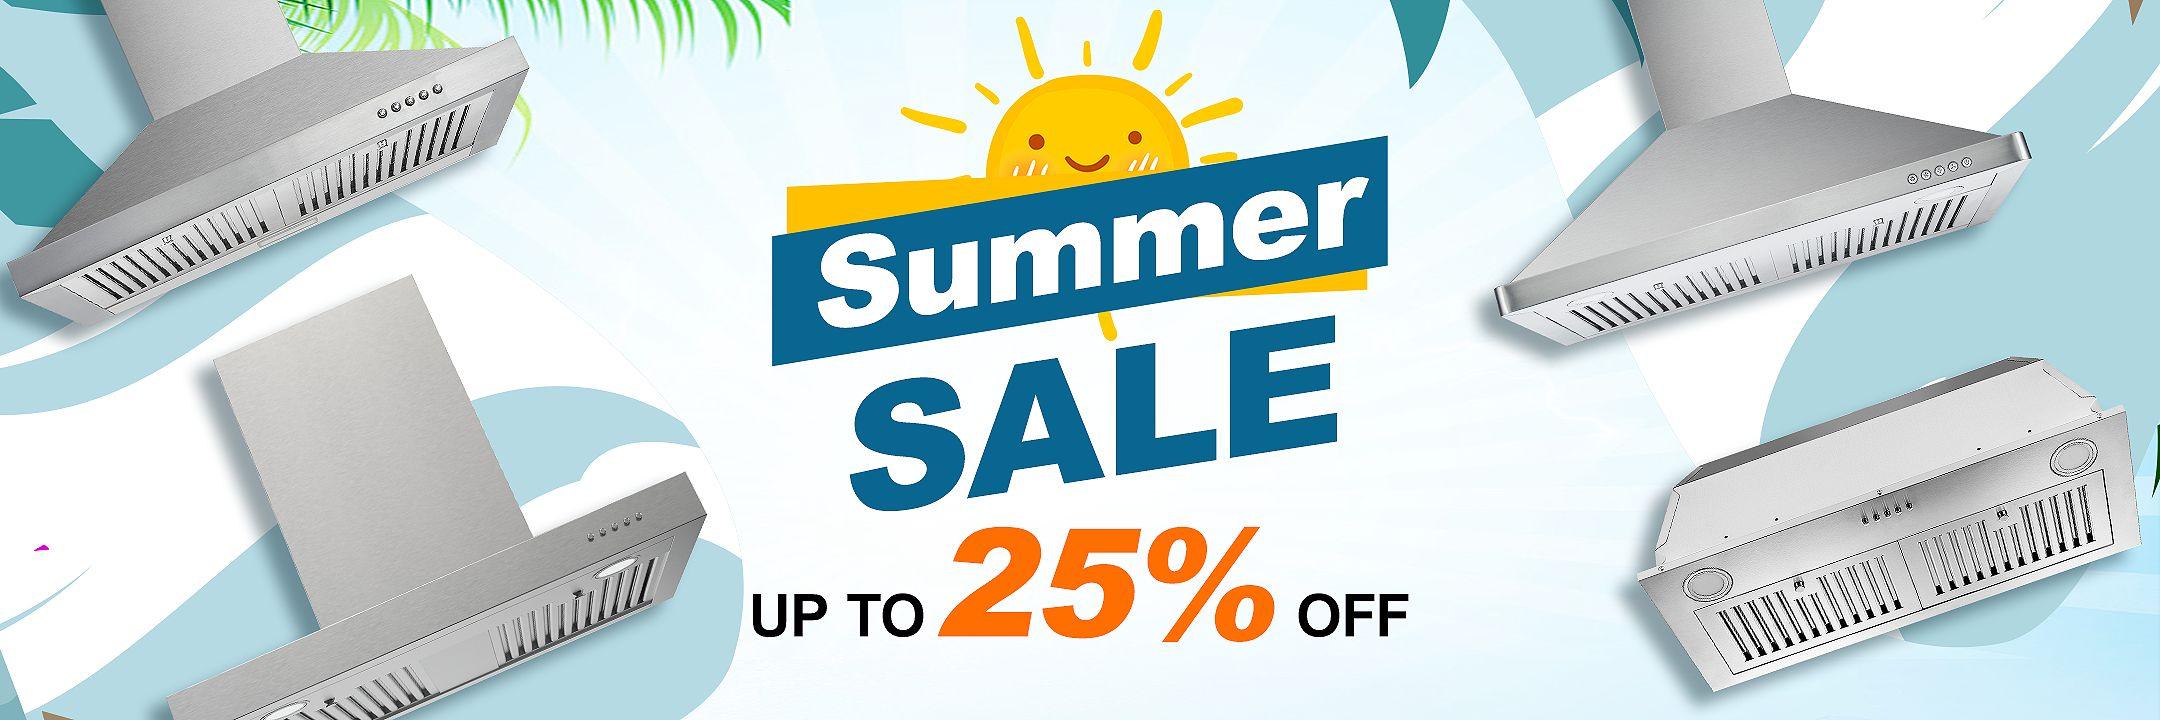 🔥 Sizzle Up Your Summer with Our Range Hood Summer Sale! - Tieasy